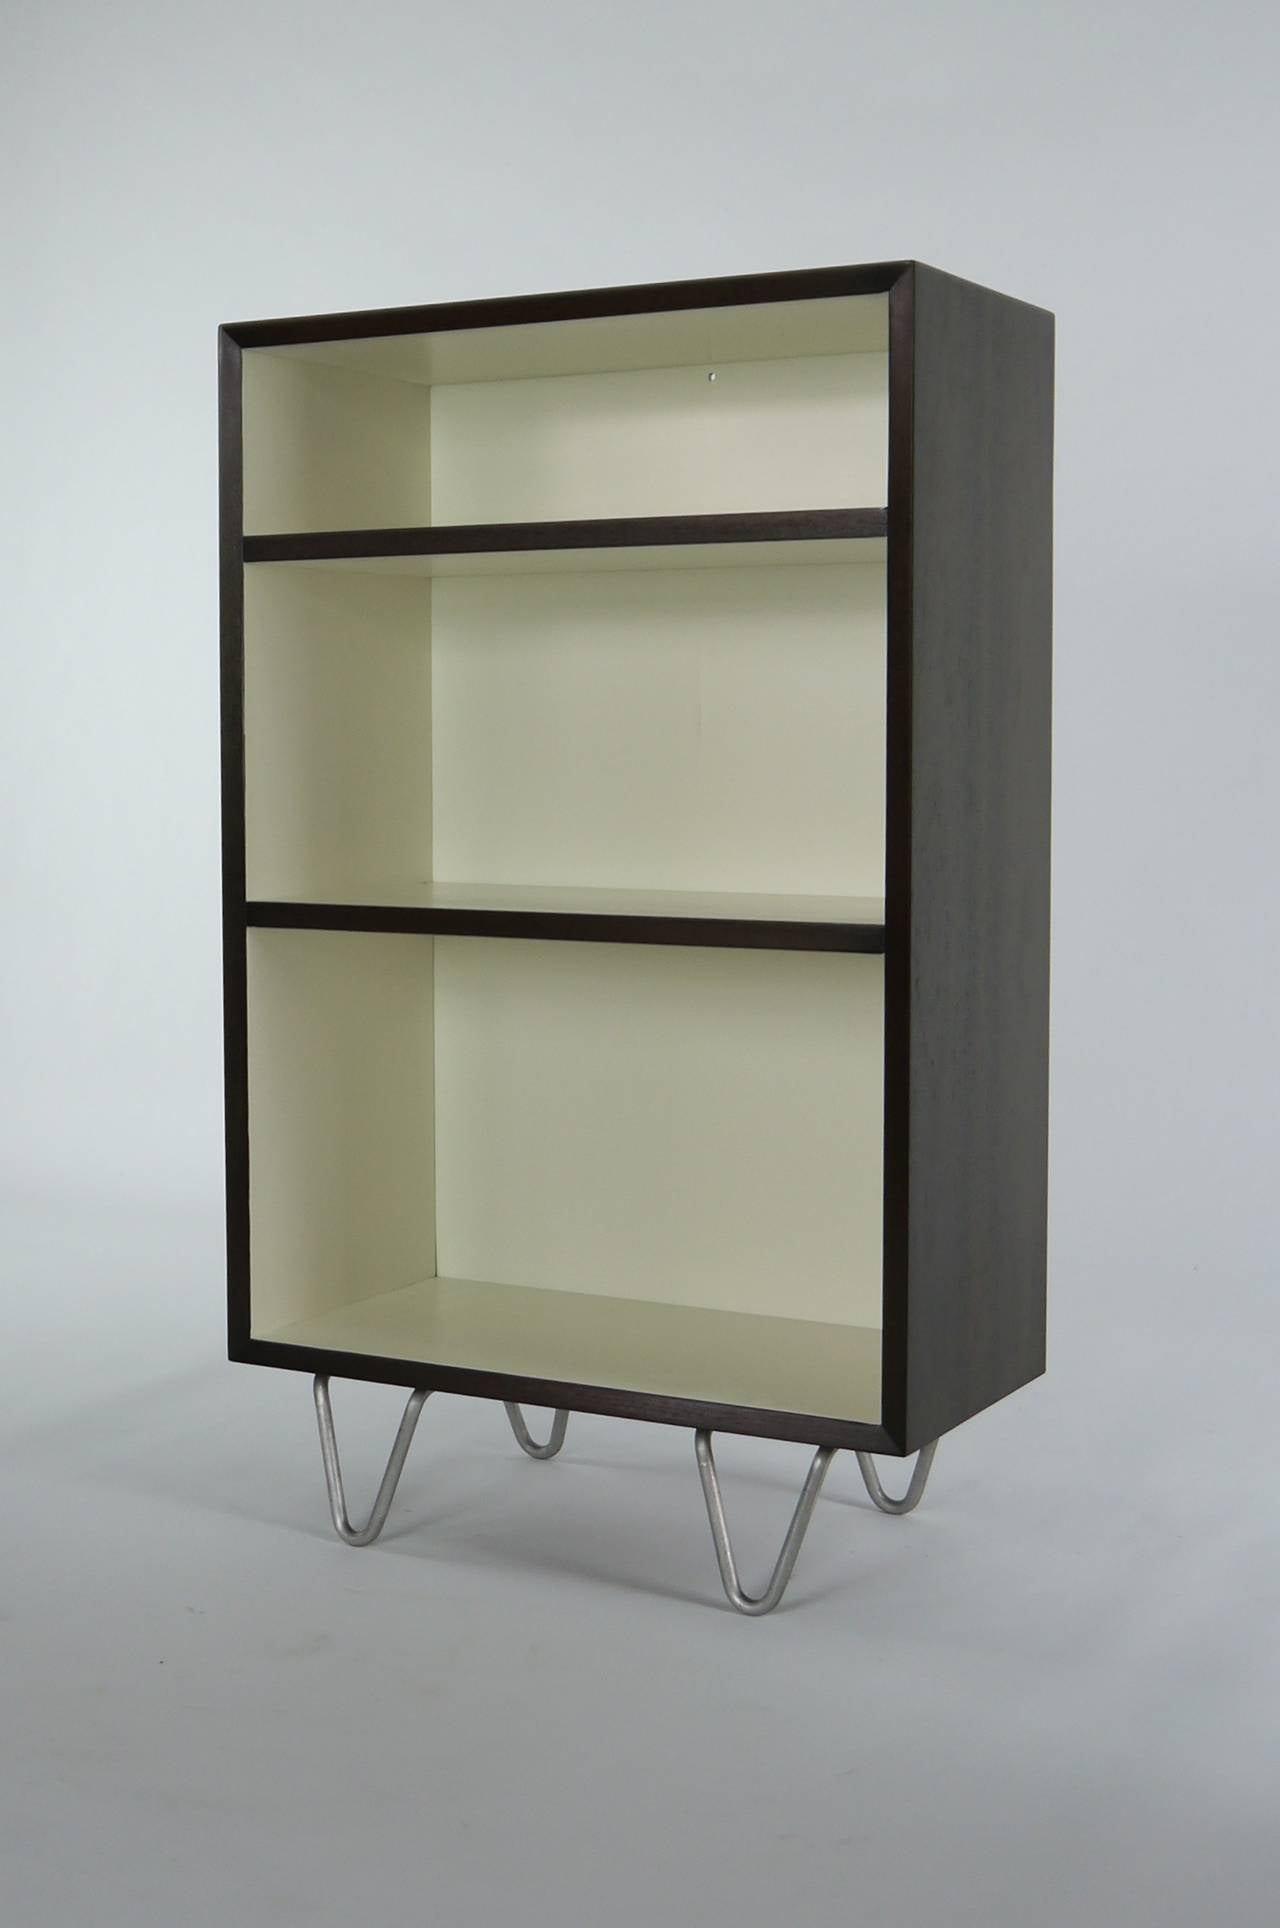 Bookcase on hairpin legs by George Nelson. Recently redone with a Cream lacquered interior and a Walnut exterior. A good solution for storage in small spaces. 39.5